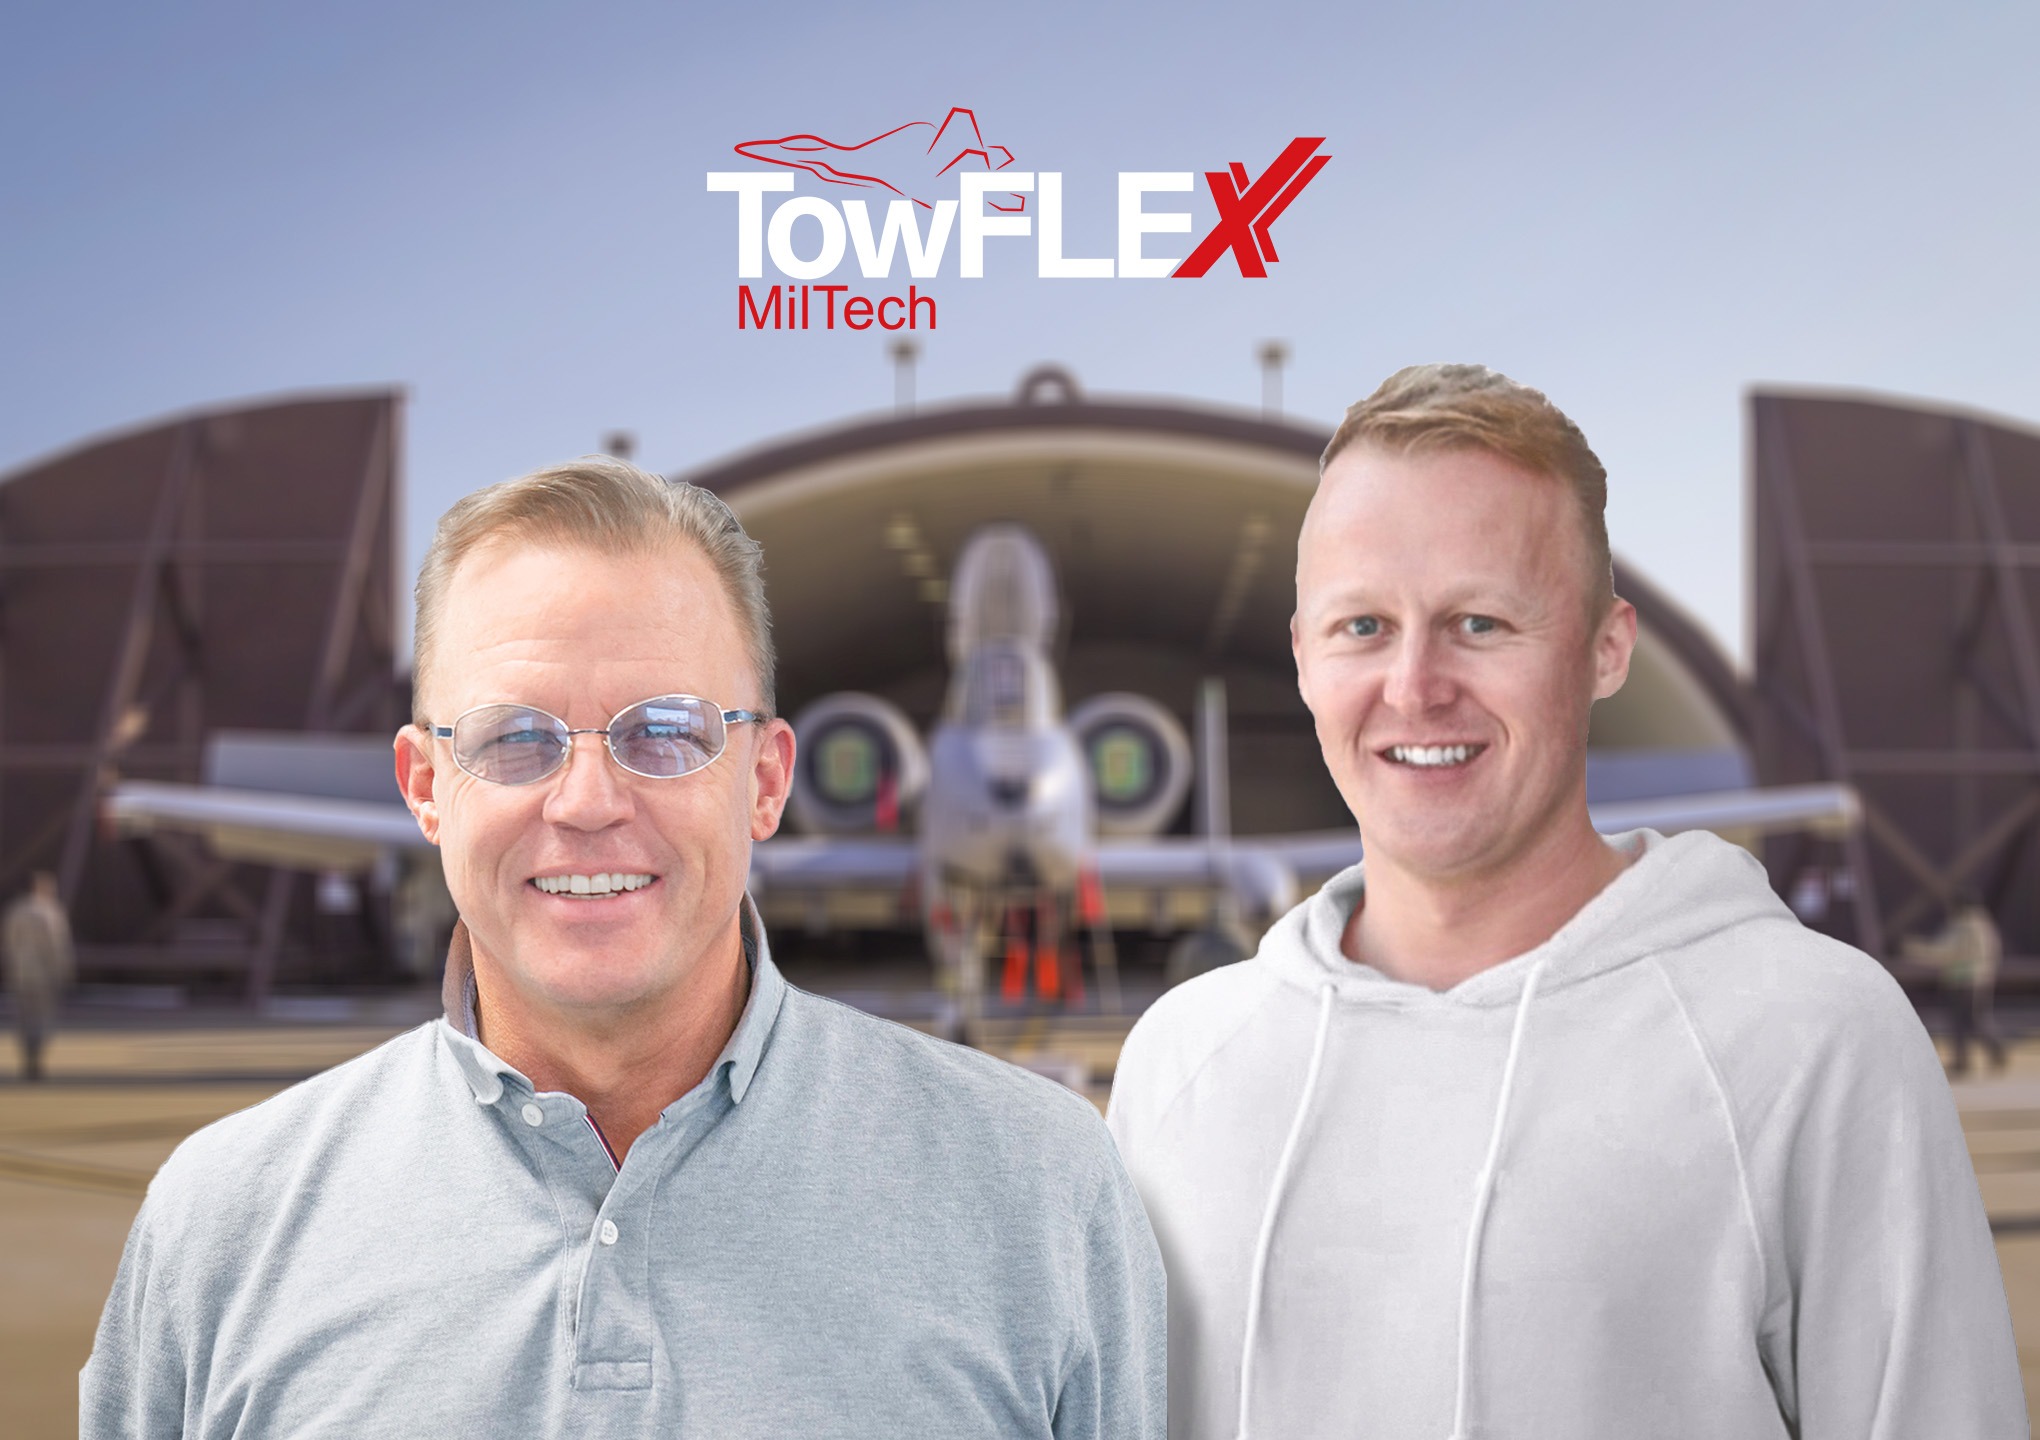 Cover image showcasing TowFLEXX Miltech Inc.'s leadership team, Ulrich 'Uli' Nielen and Dr. Tobias Strobl, against the backdrop of a military airbase, symbolizing their commitment to providing specialized towing solutions for the US government and military